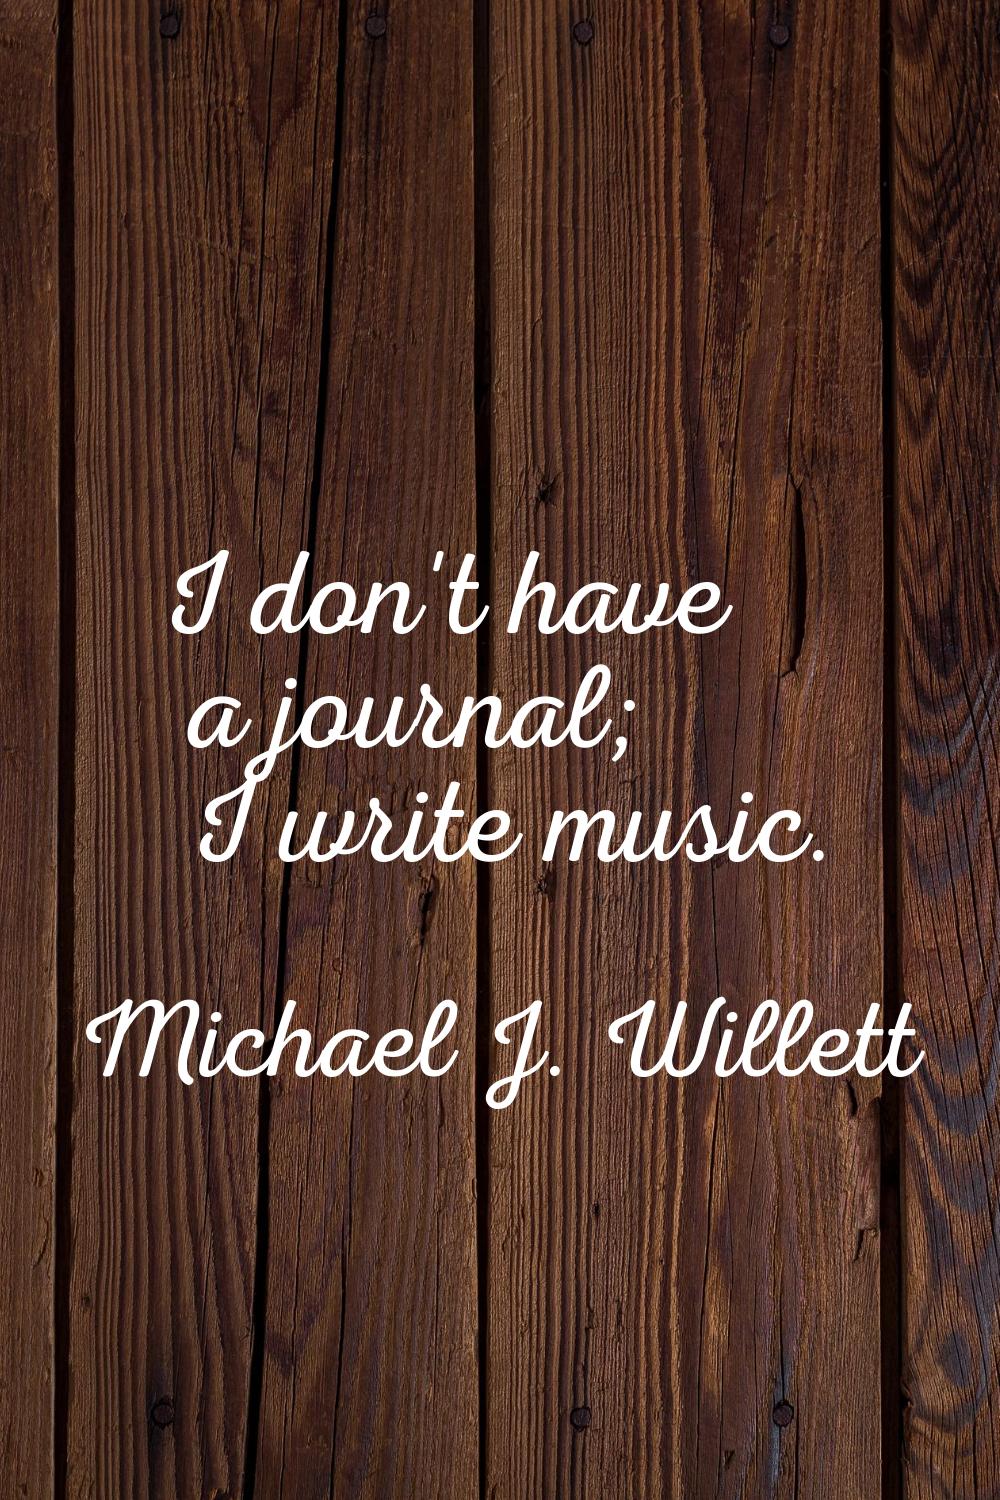 I don't have a journal; I write music.